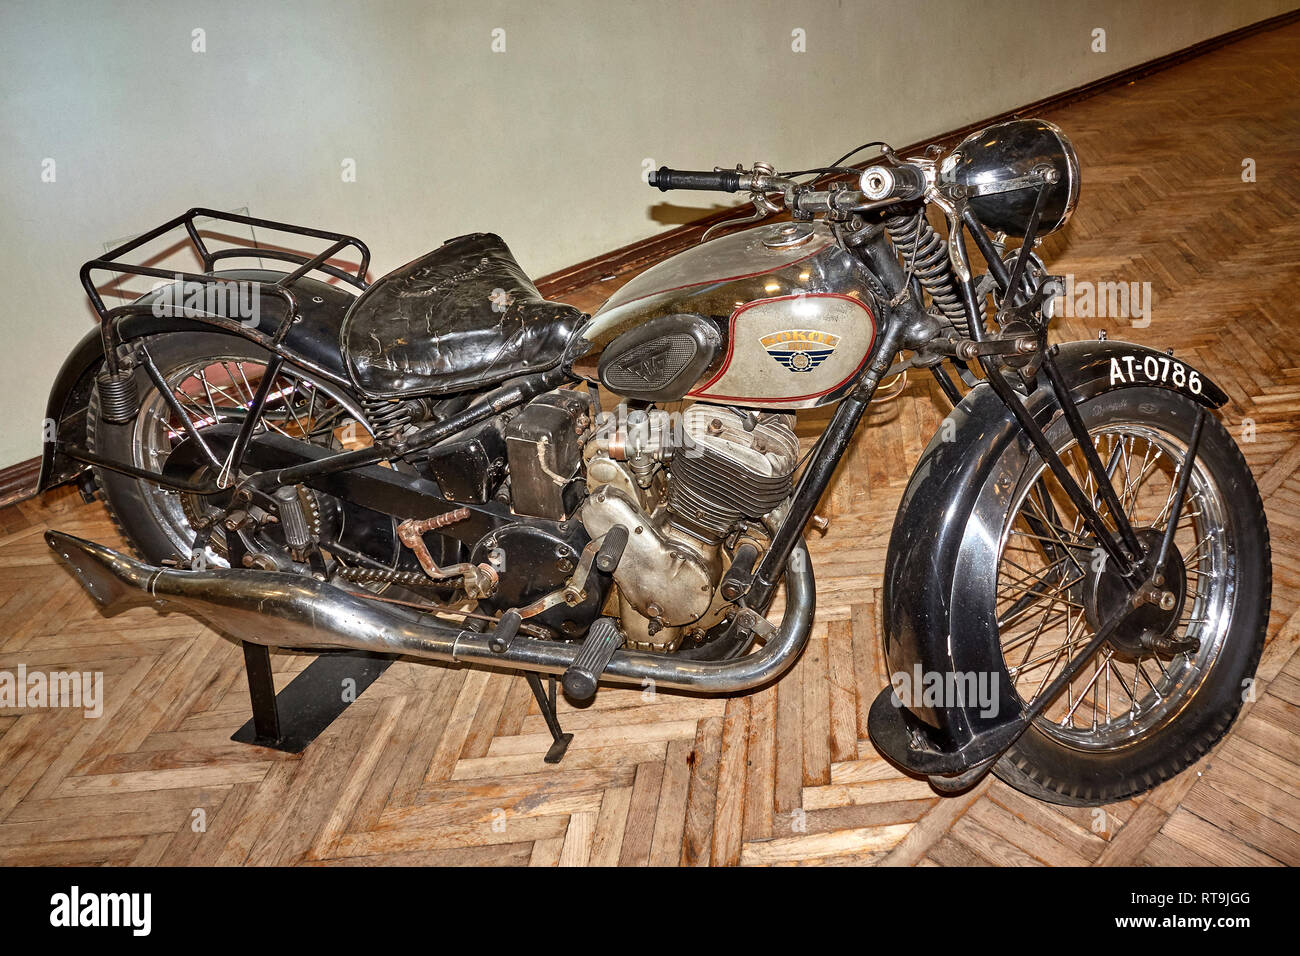 Warsaw, Poland - September 17, 2018. Sokol 600 motorcycle manufactured in Poland before World War II exhibited in Museum of Technology Stock Photo